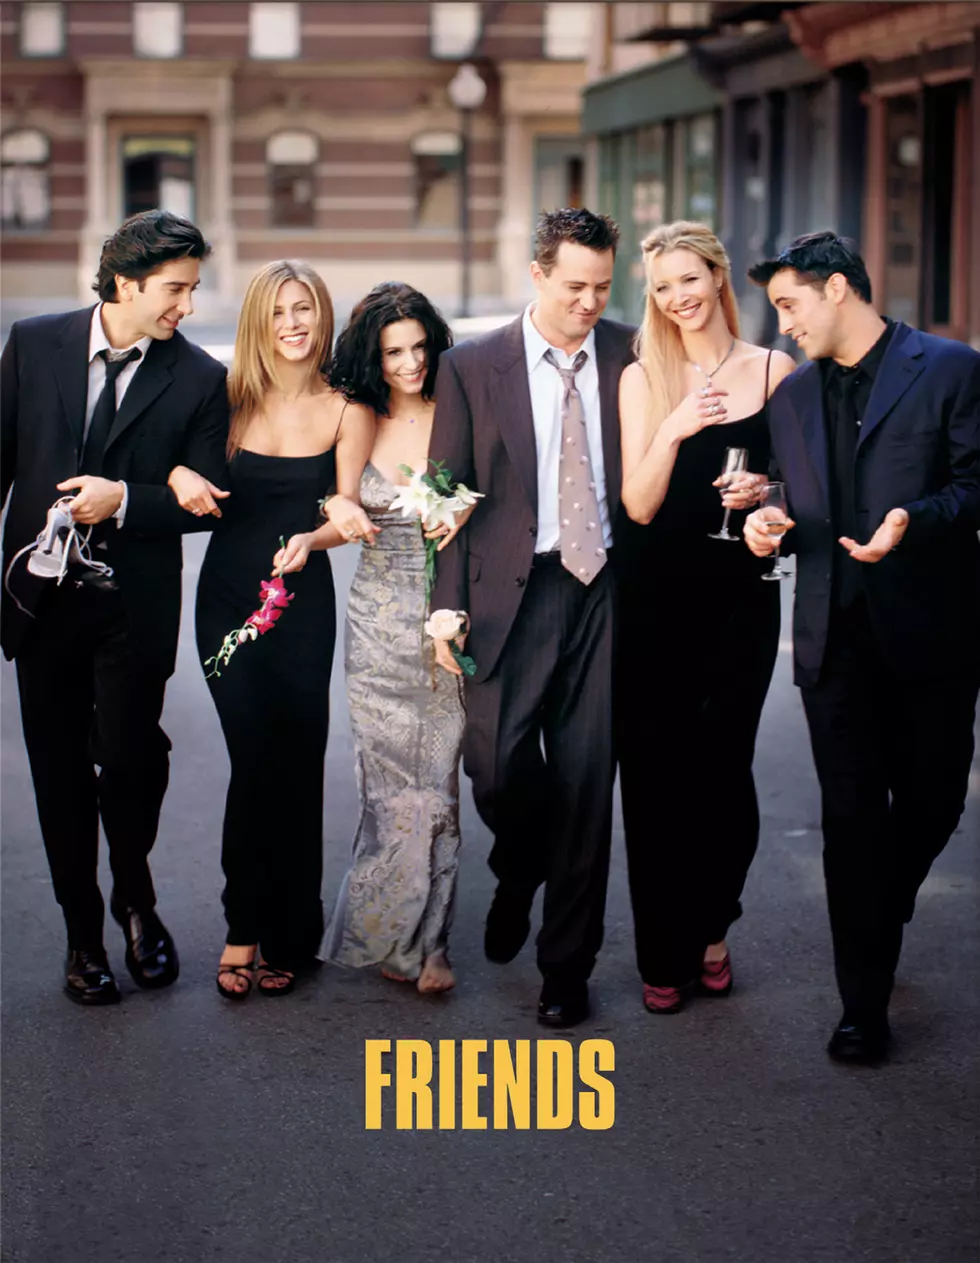 Flashback Friday: Friends Comes To Netflix